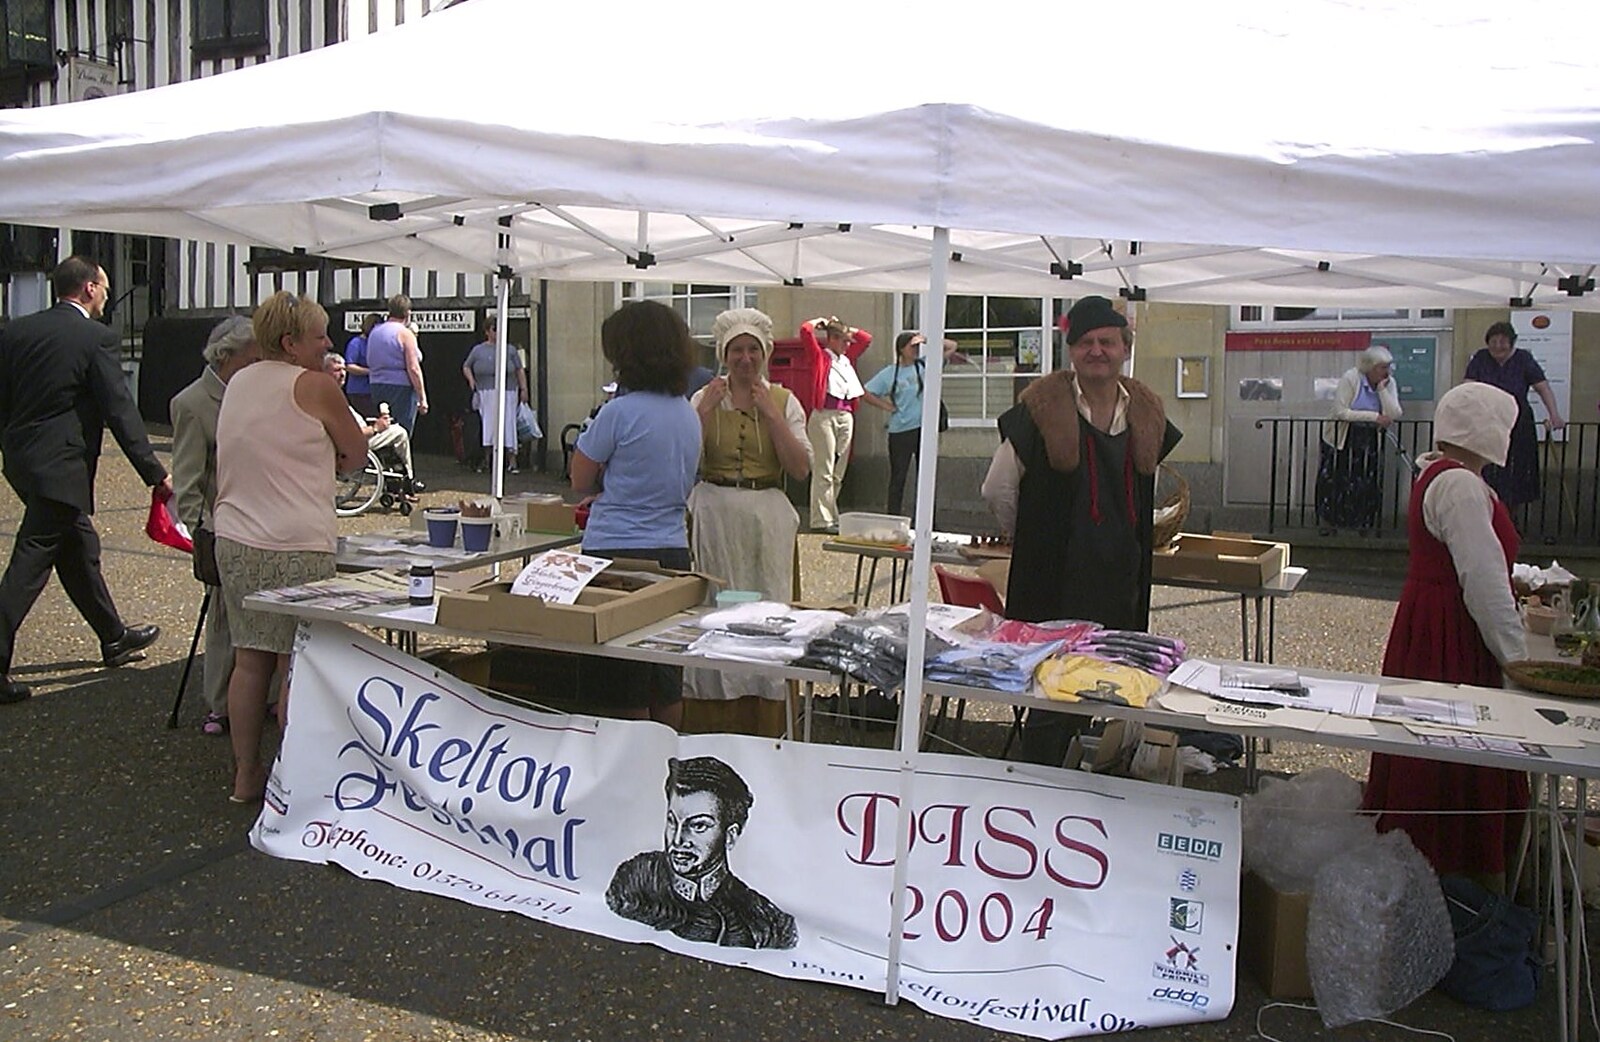 A tee-shirt stall from Andrey Leaves Trigenix, More Skelton Festival and a Transit of Venus, Cambridge and Diss - 4th June 2004